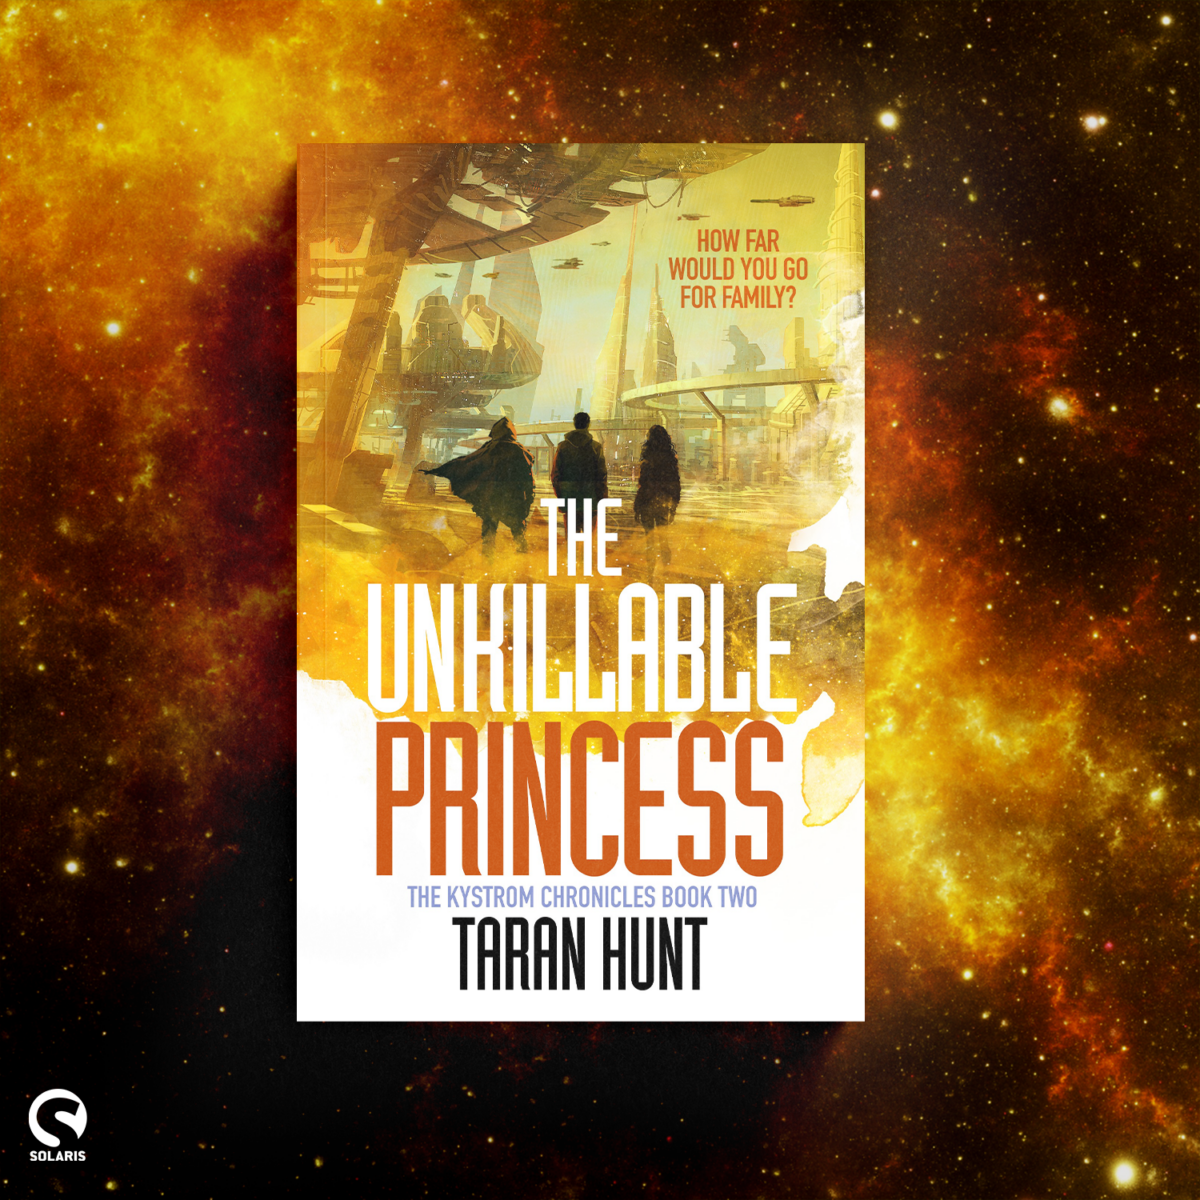 Revealing the cover of The Unkillable Princess by Taran Hunt!